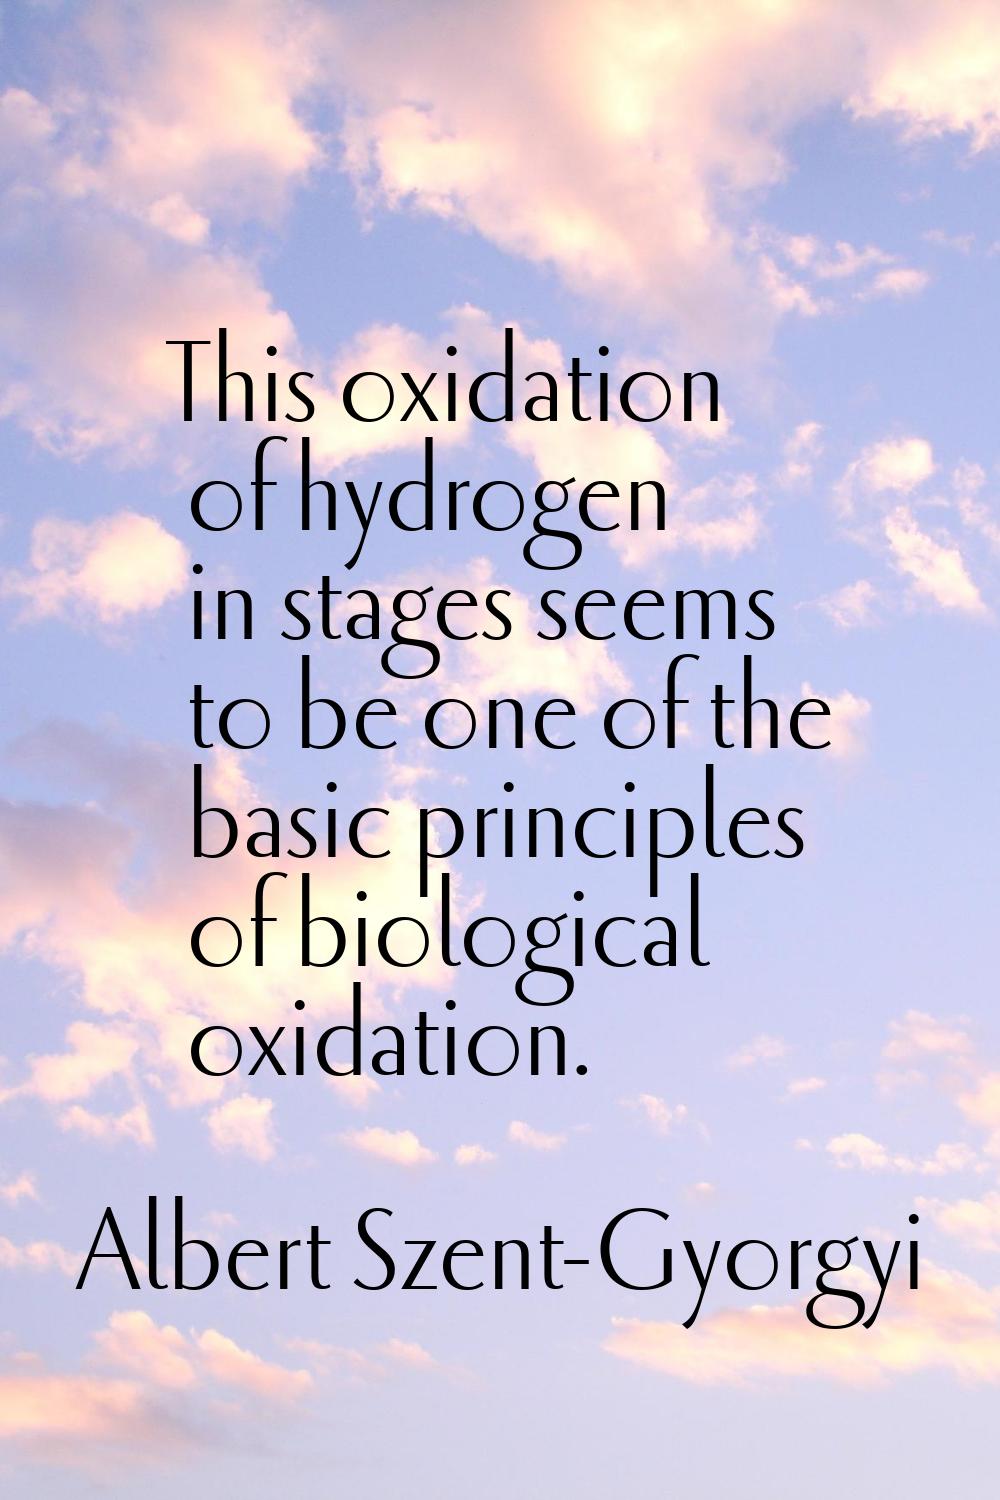 This oxidation of hydrogen in stages seems to be one of the basic principles of biological oxidatio